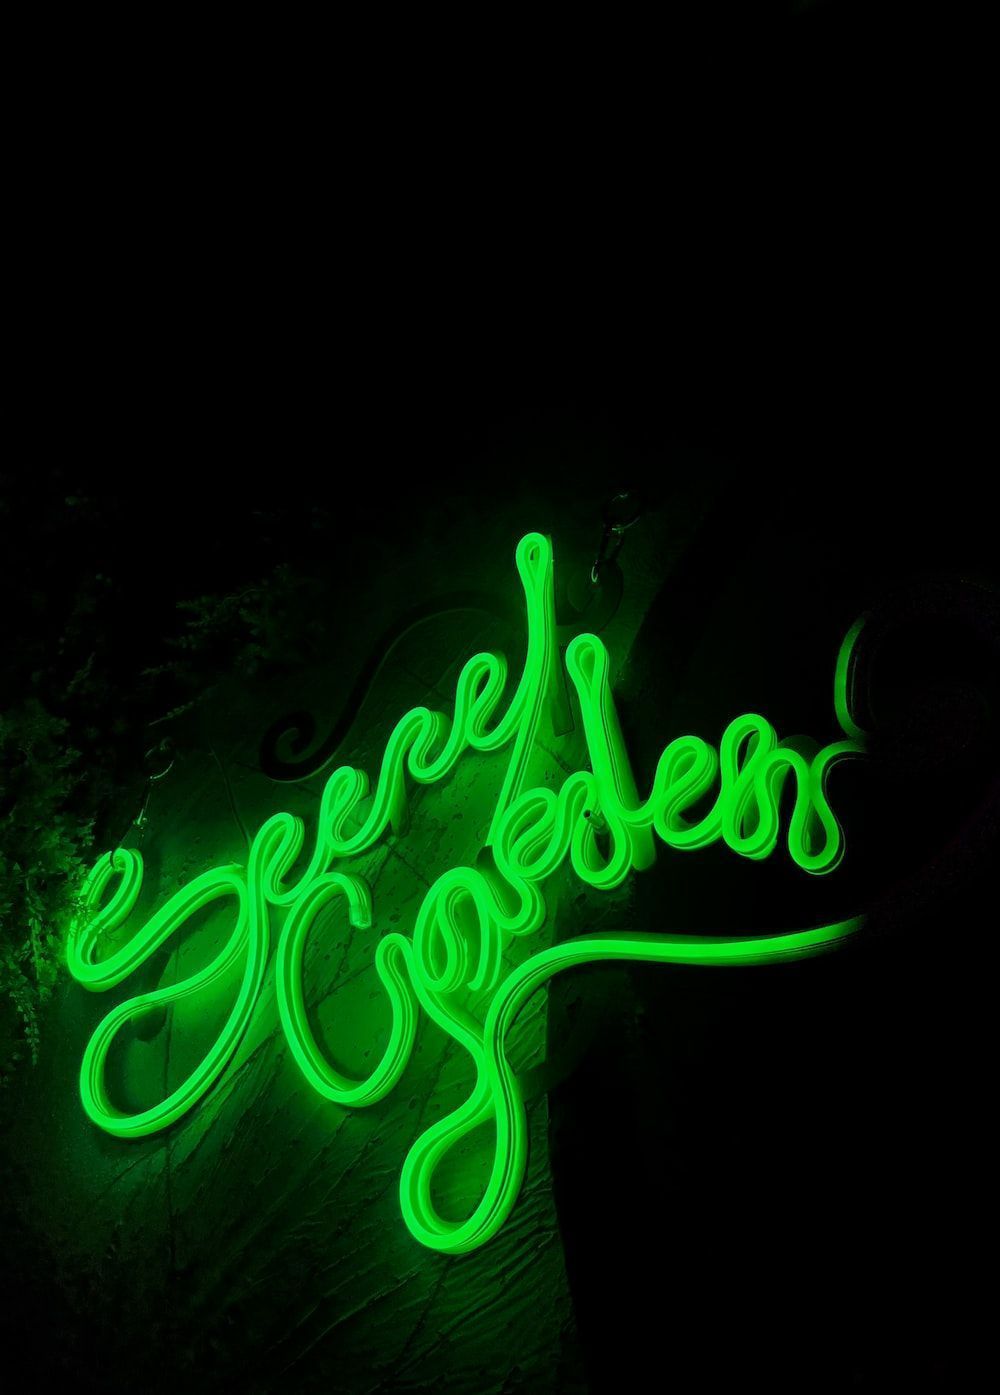 A neon green neon sign on a black wall photo